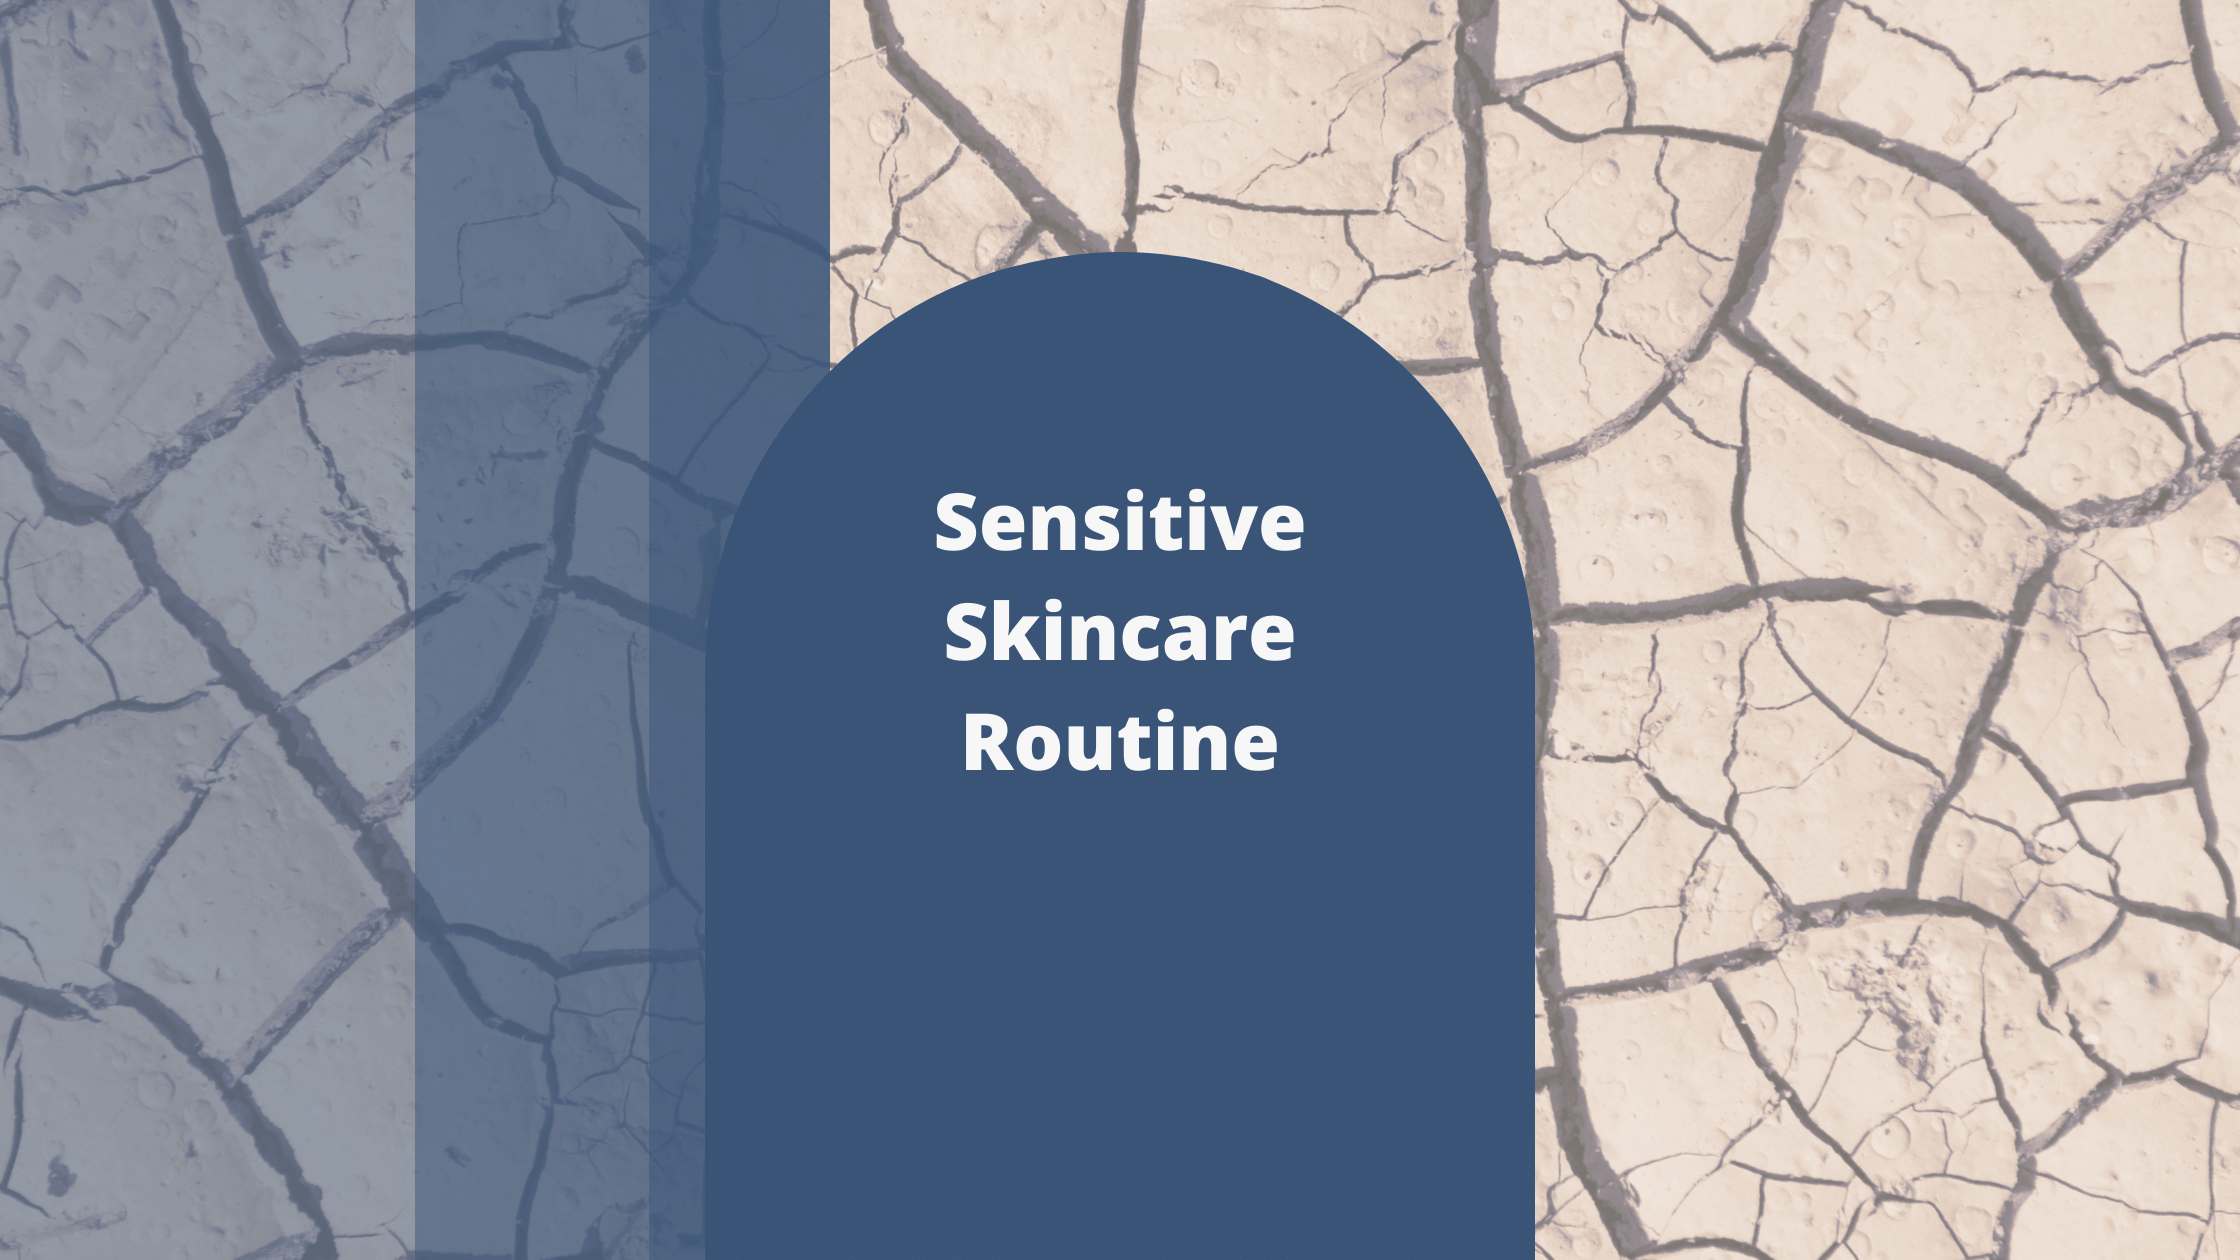 What Skincare Routine Should I Have for Sensitive Skin?